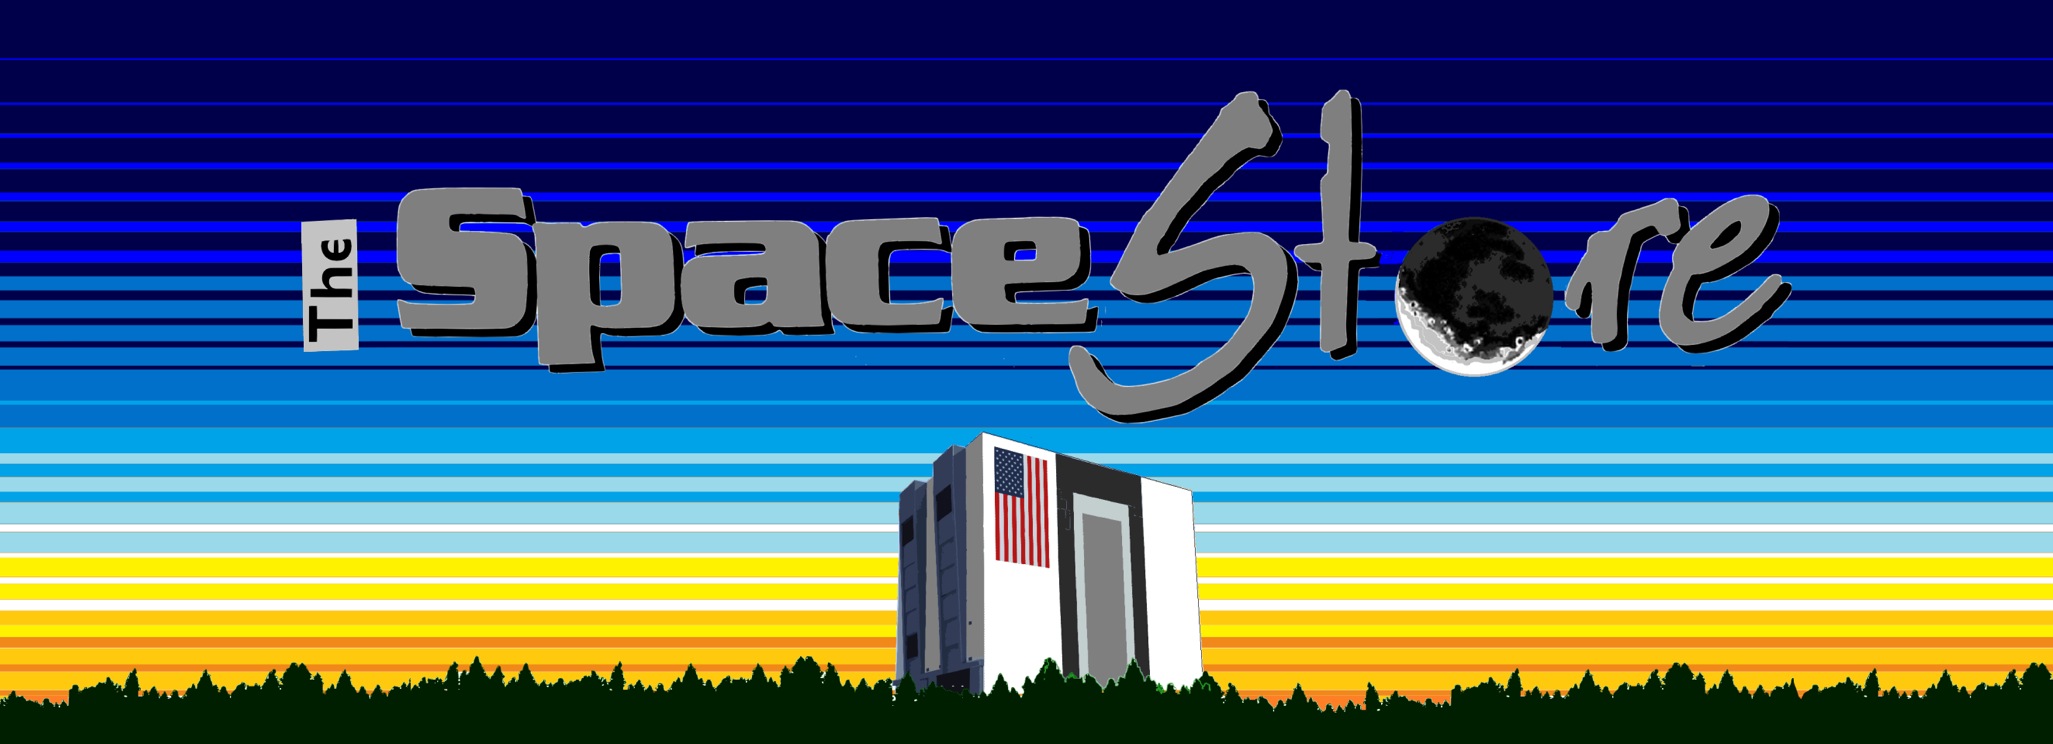 The Space Store is poised for its grand opening on Friday, September 12, at 5 p.m. Manager and artist Tim Gagnon designed its logo, pictured here. Image Credit: Tim Gagnon for The Space Store